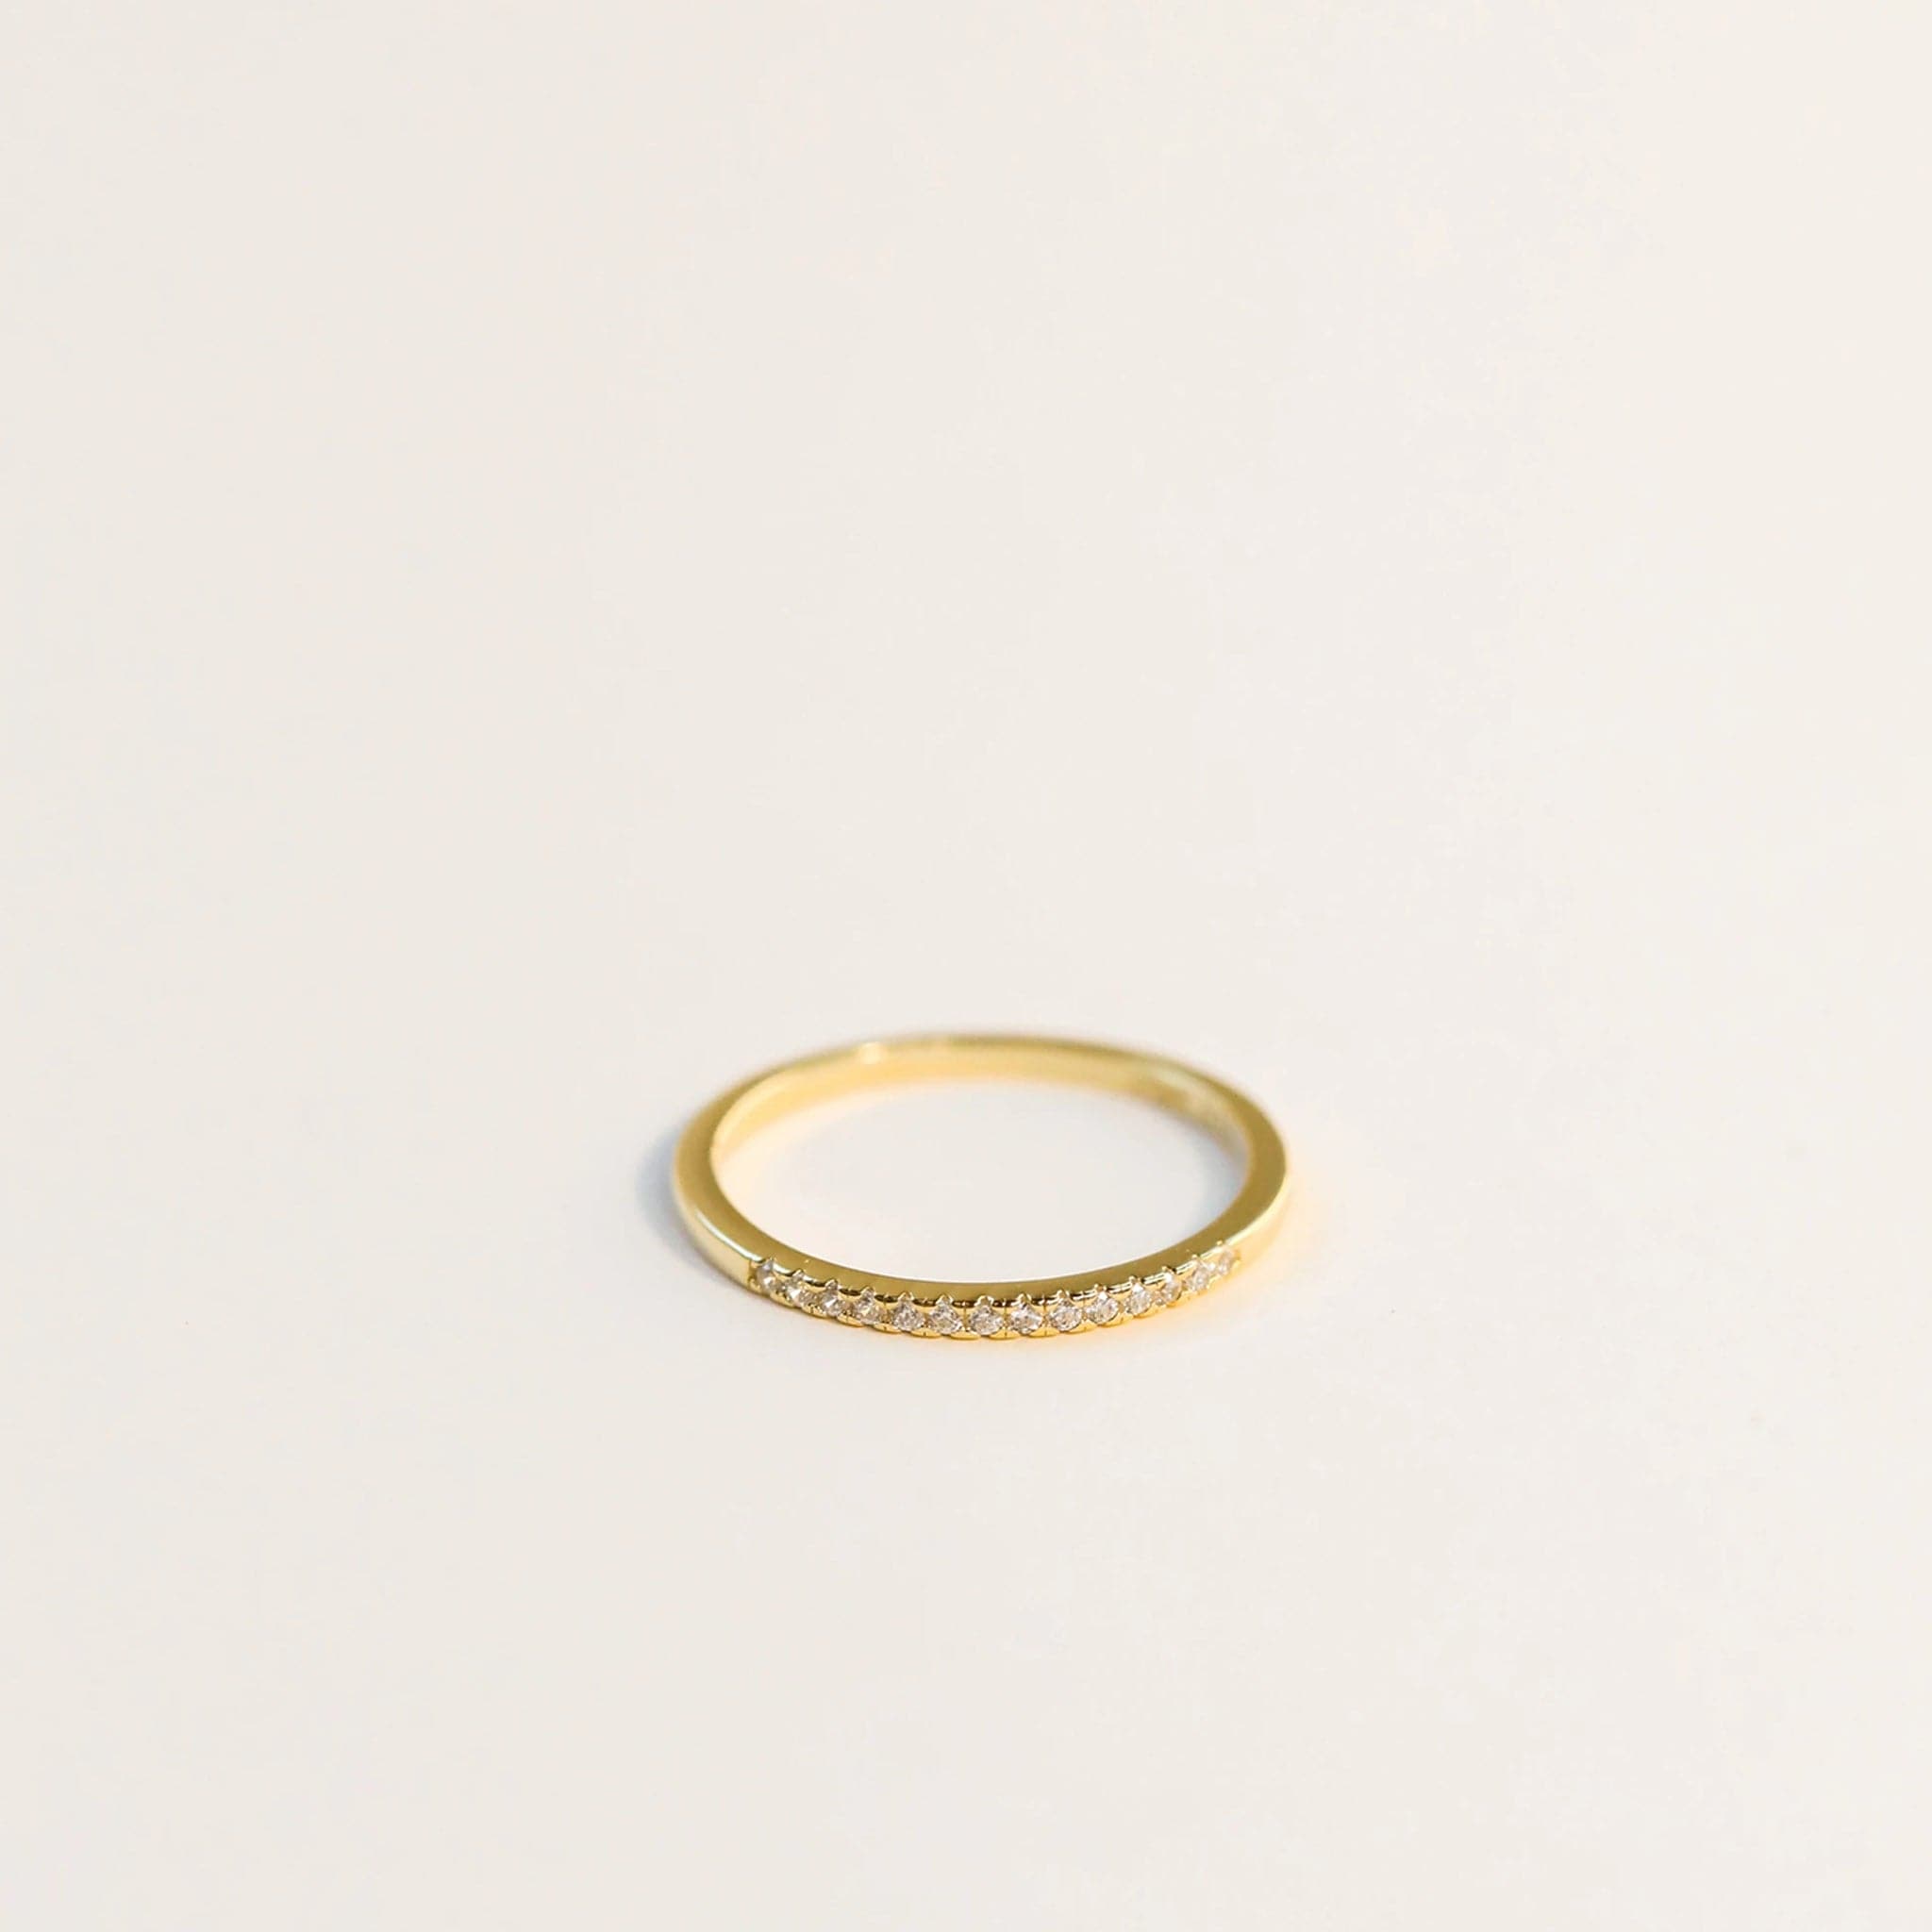 A delicate gold ring with a half pave design. This ring&#39;s band is thin, which is perfect for stacking.